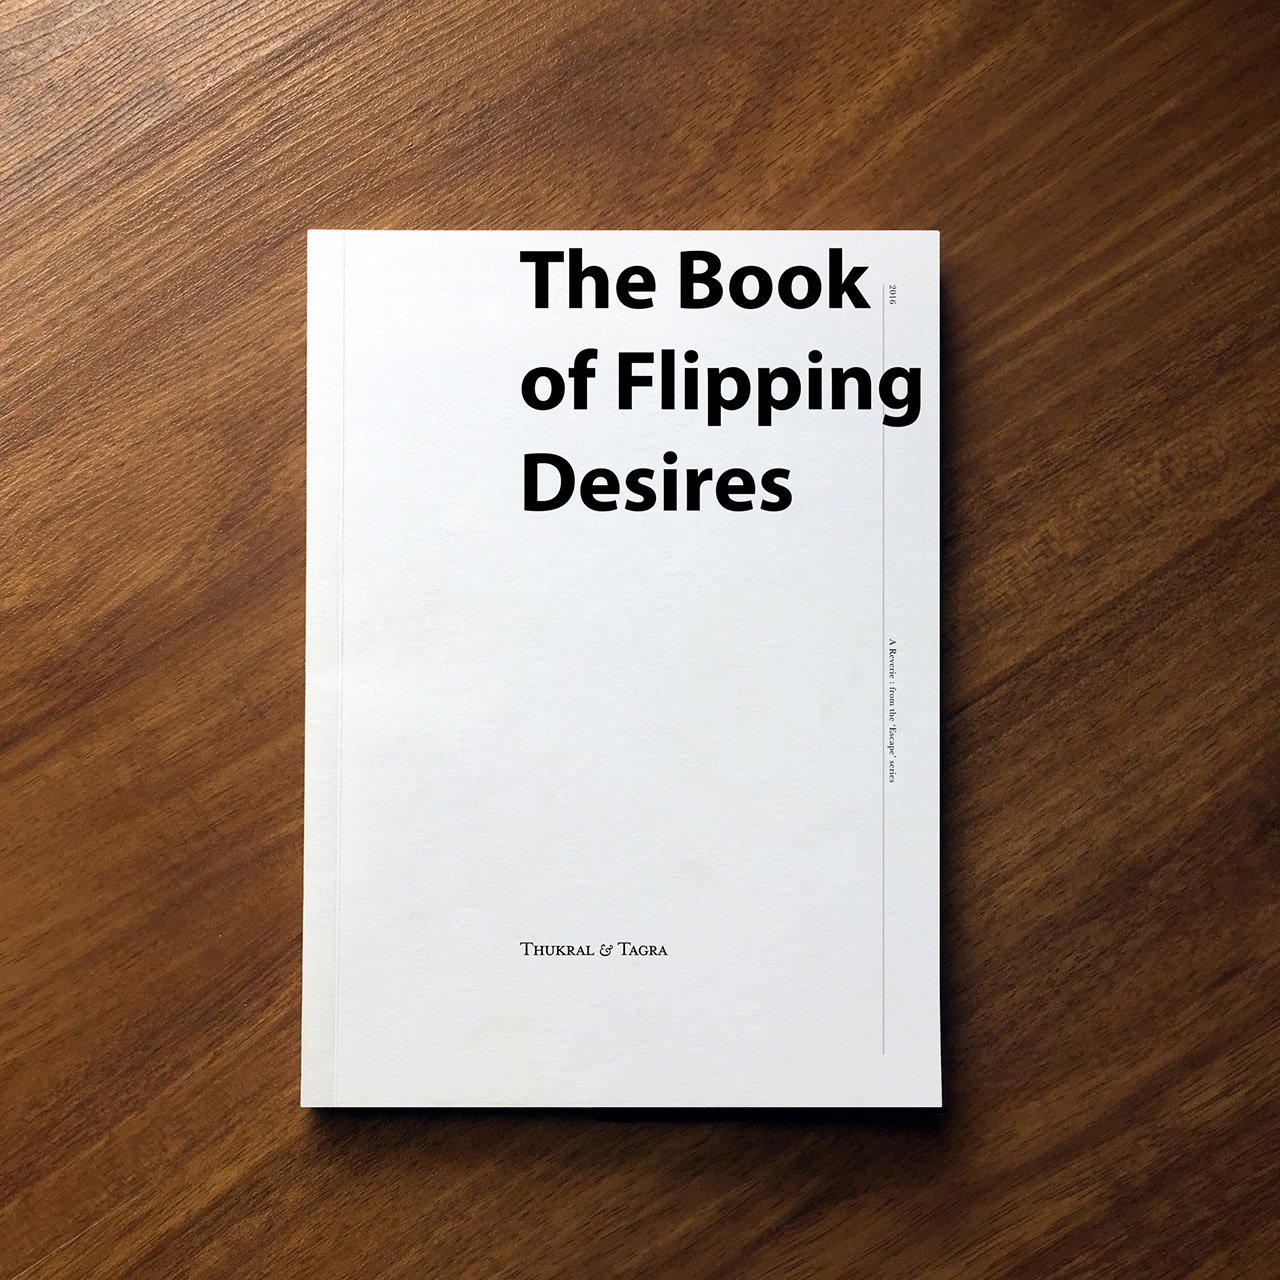 The Book of Flipping Desires